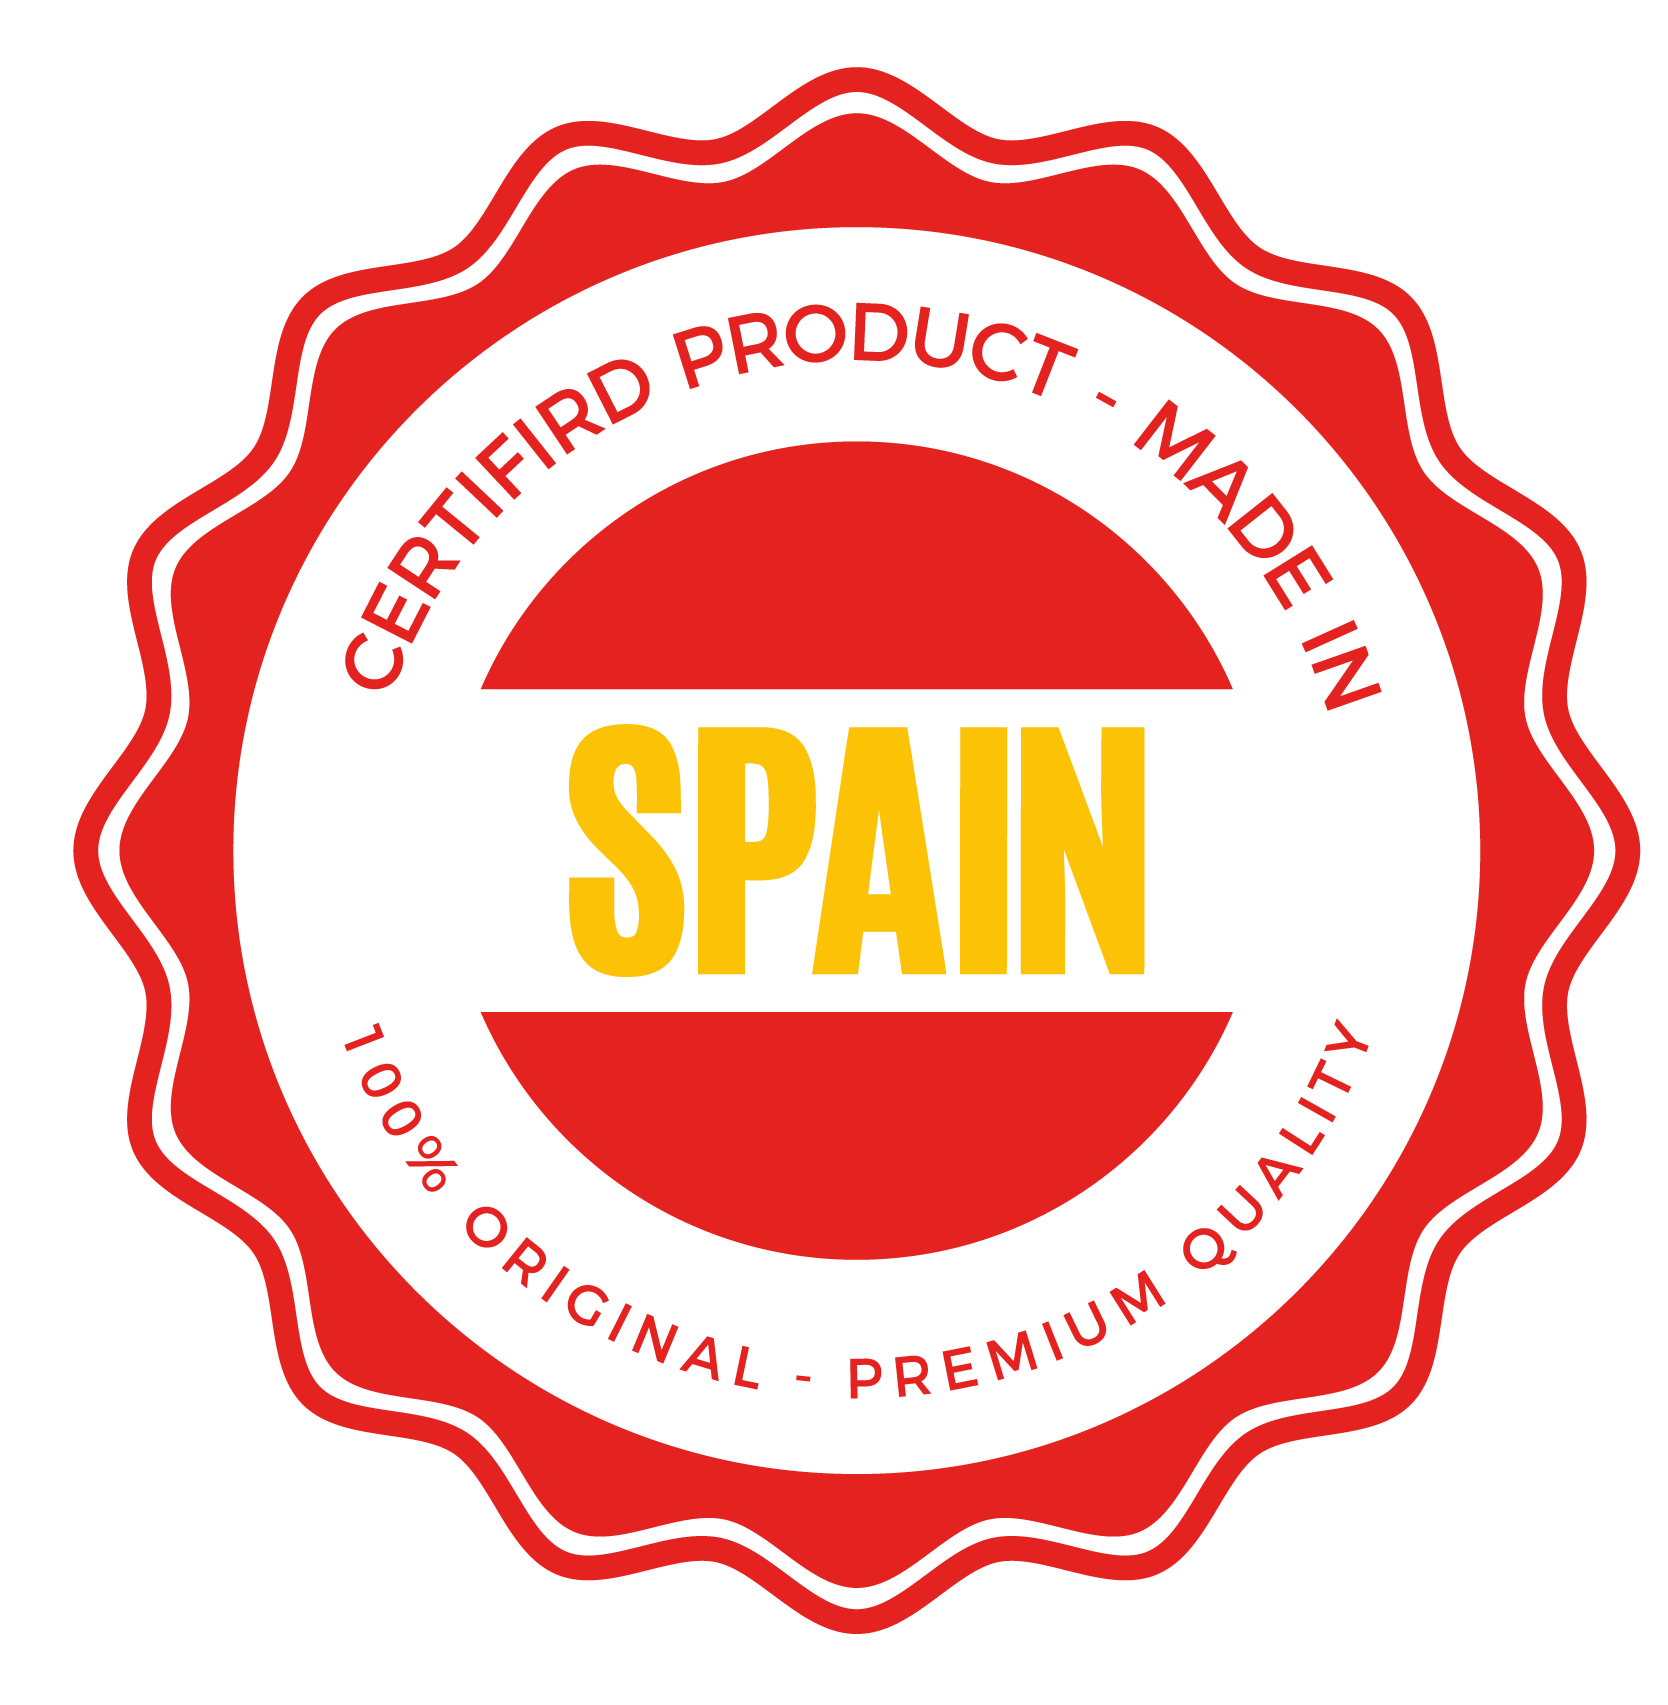 Certified product seal made in Spain